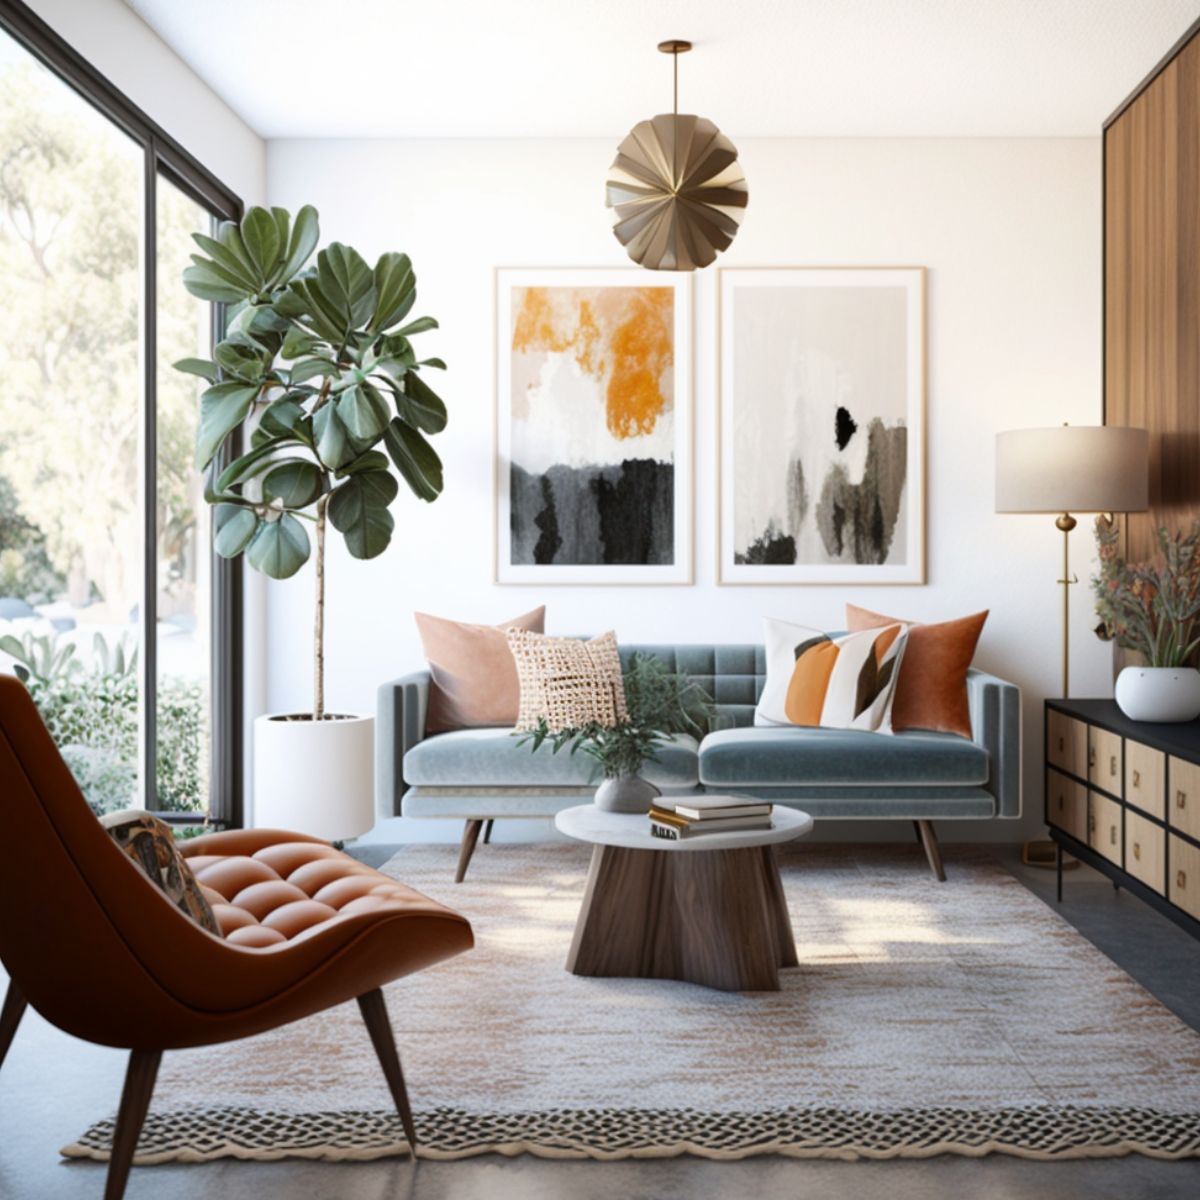 Living room with a California modern theme